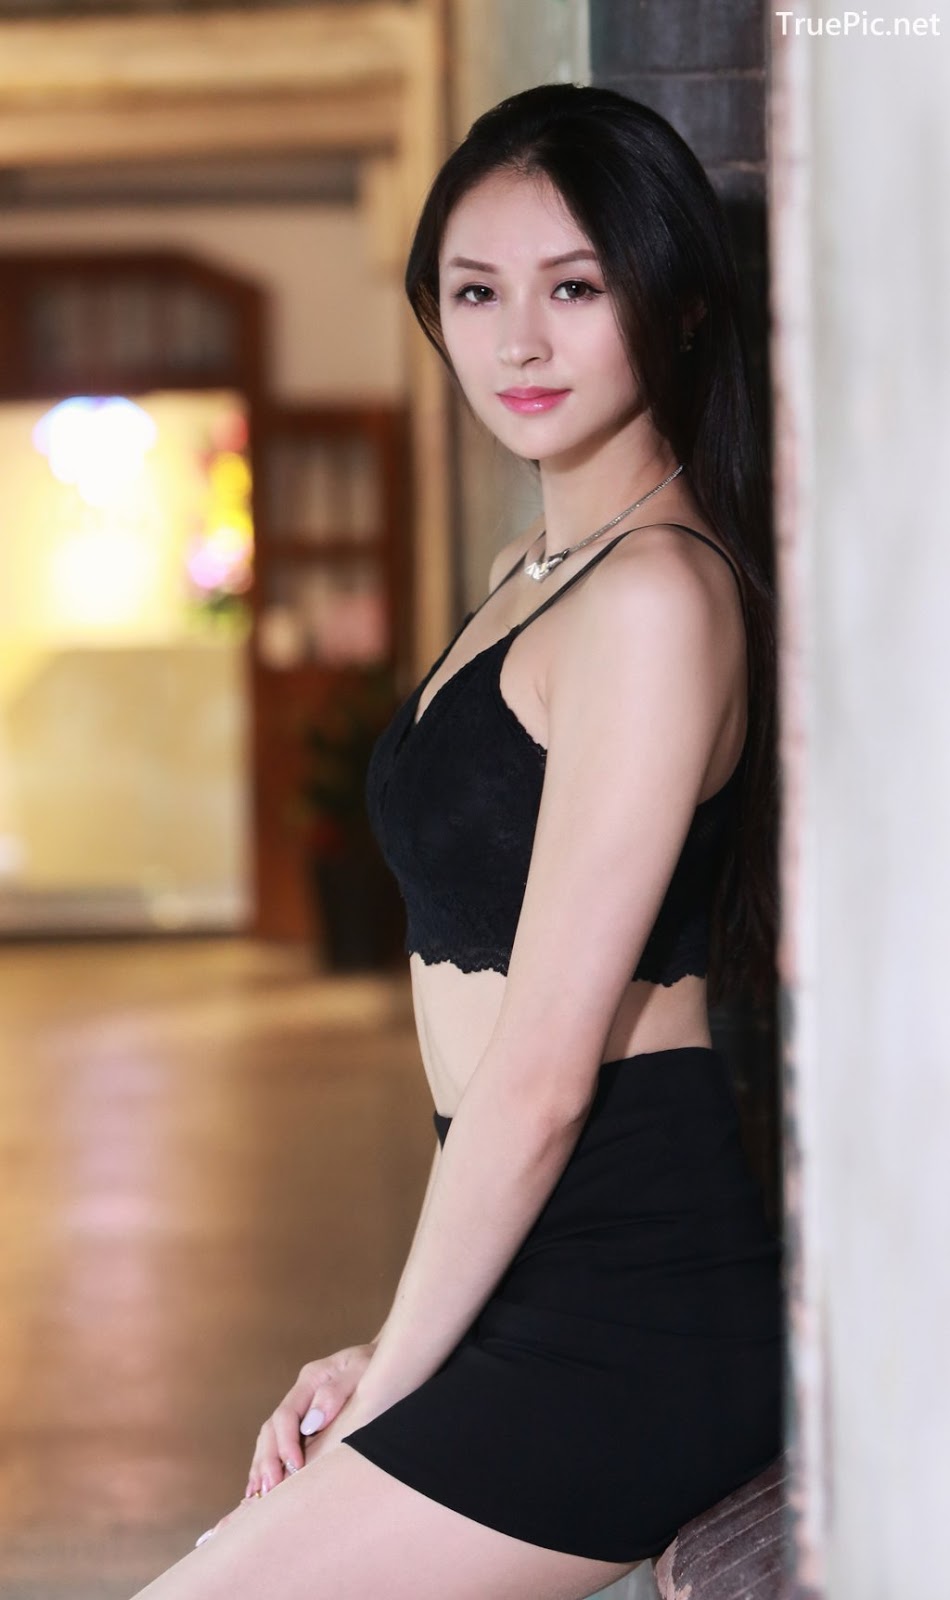 Image-Taiwanese-Beautiful-Long-Legs-Girl-雪岑Lola-Black-Sexy-Short-Pants-and-Crop-Top-Outfit-TruePic.net- Picture-38